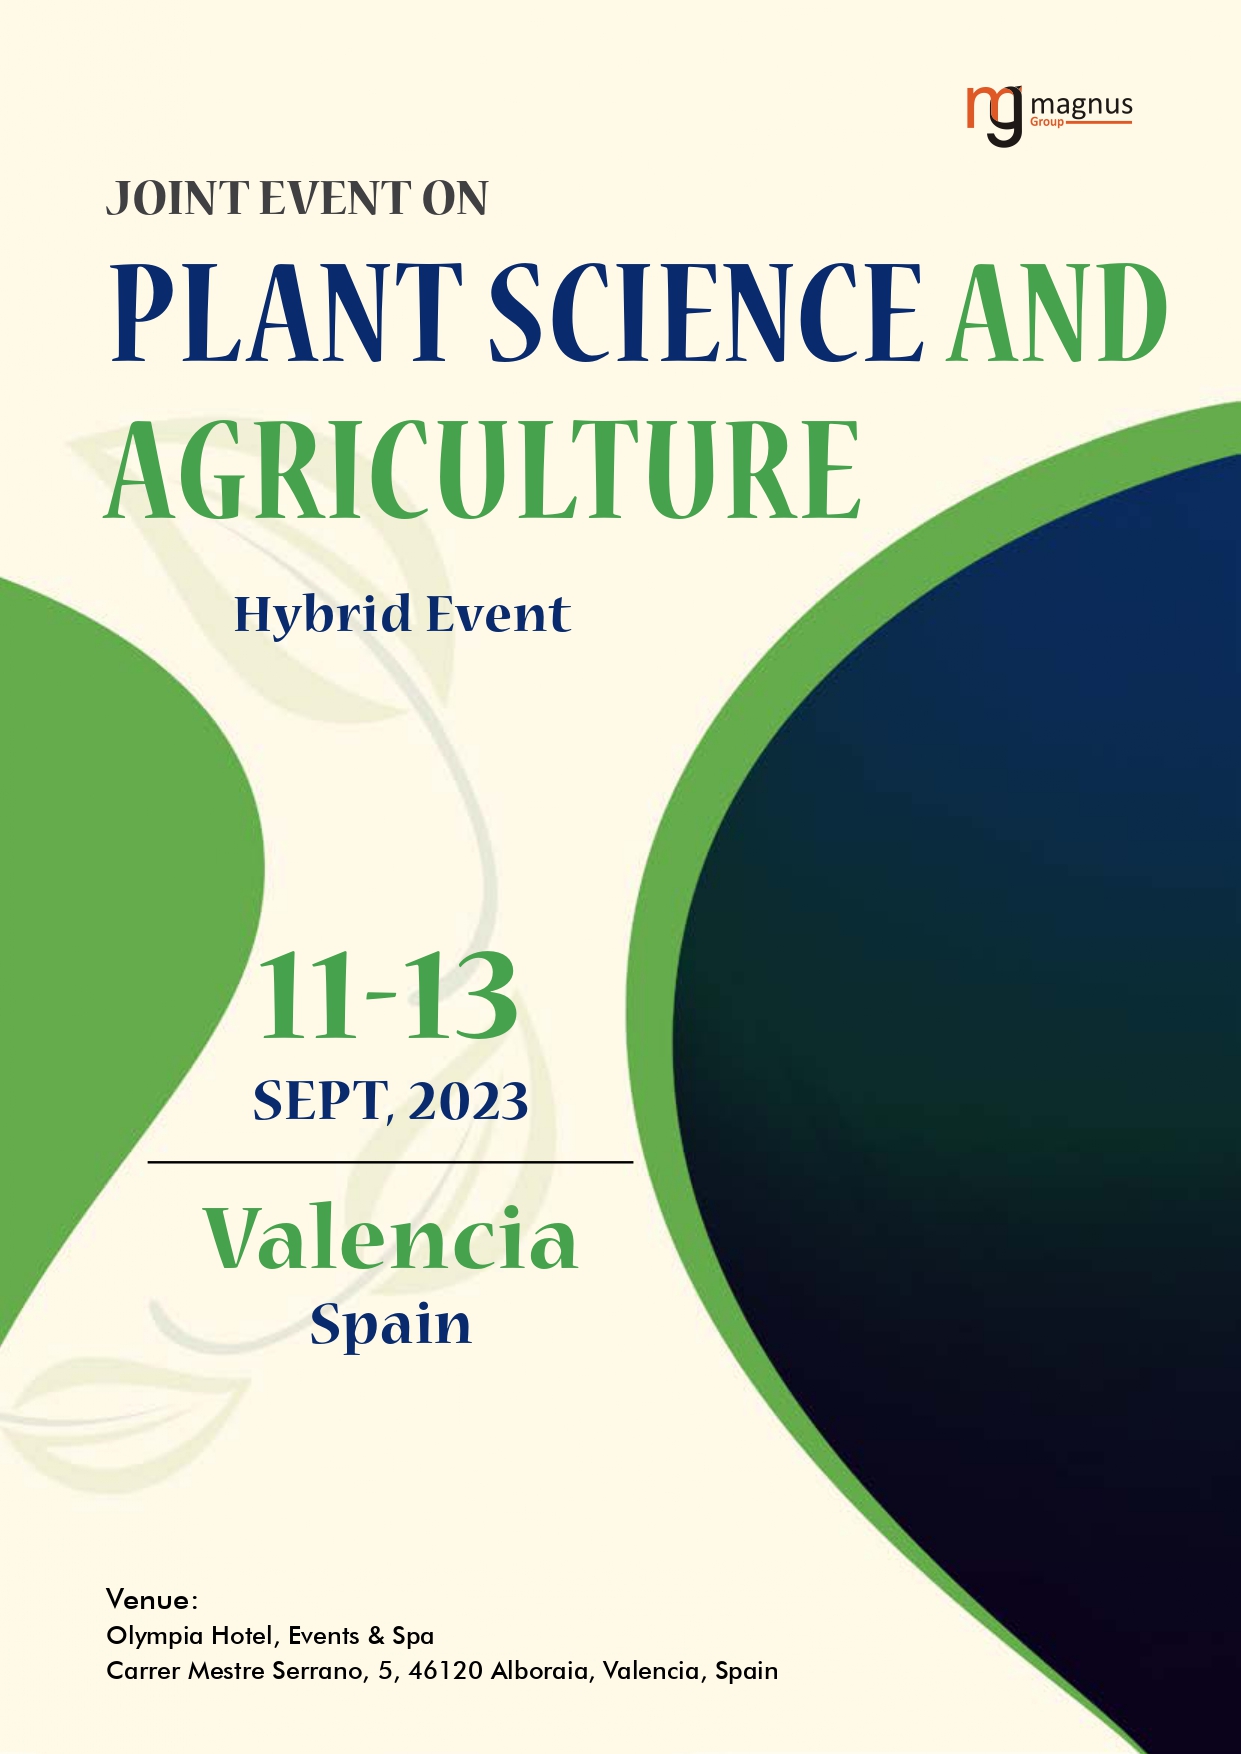 Plant Science and Molecular Biology | Valencia, Spain Event Book